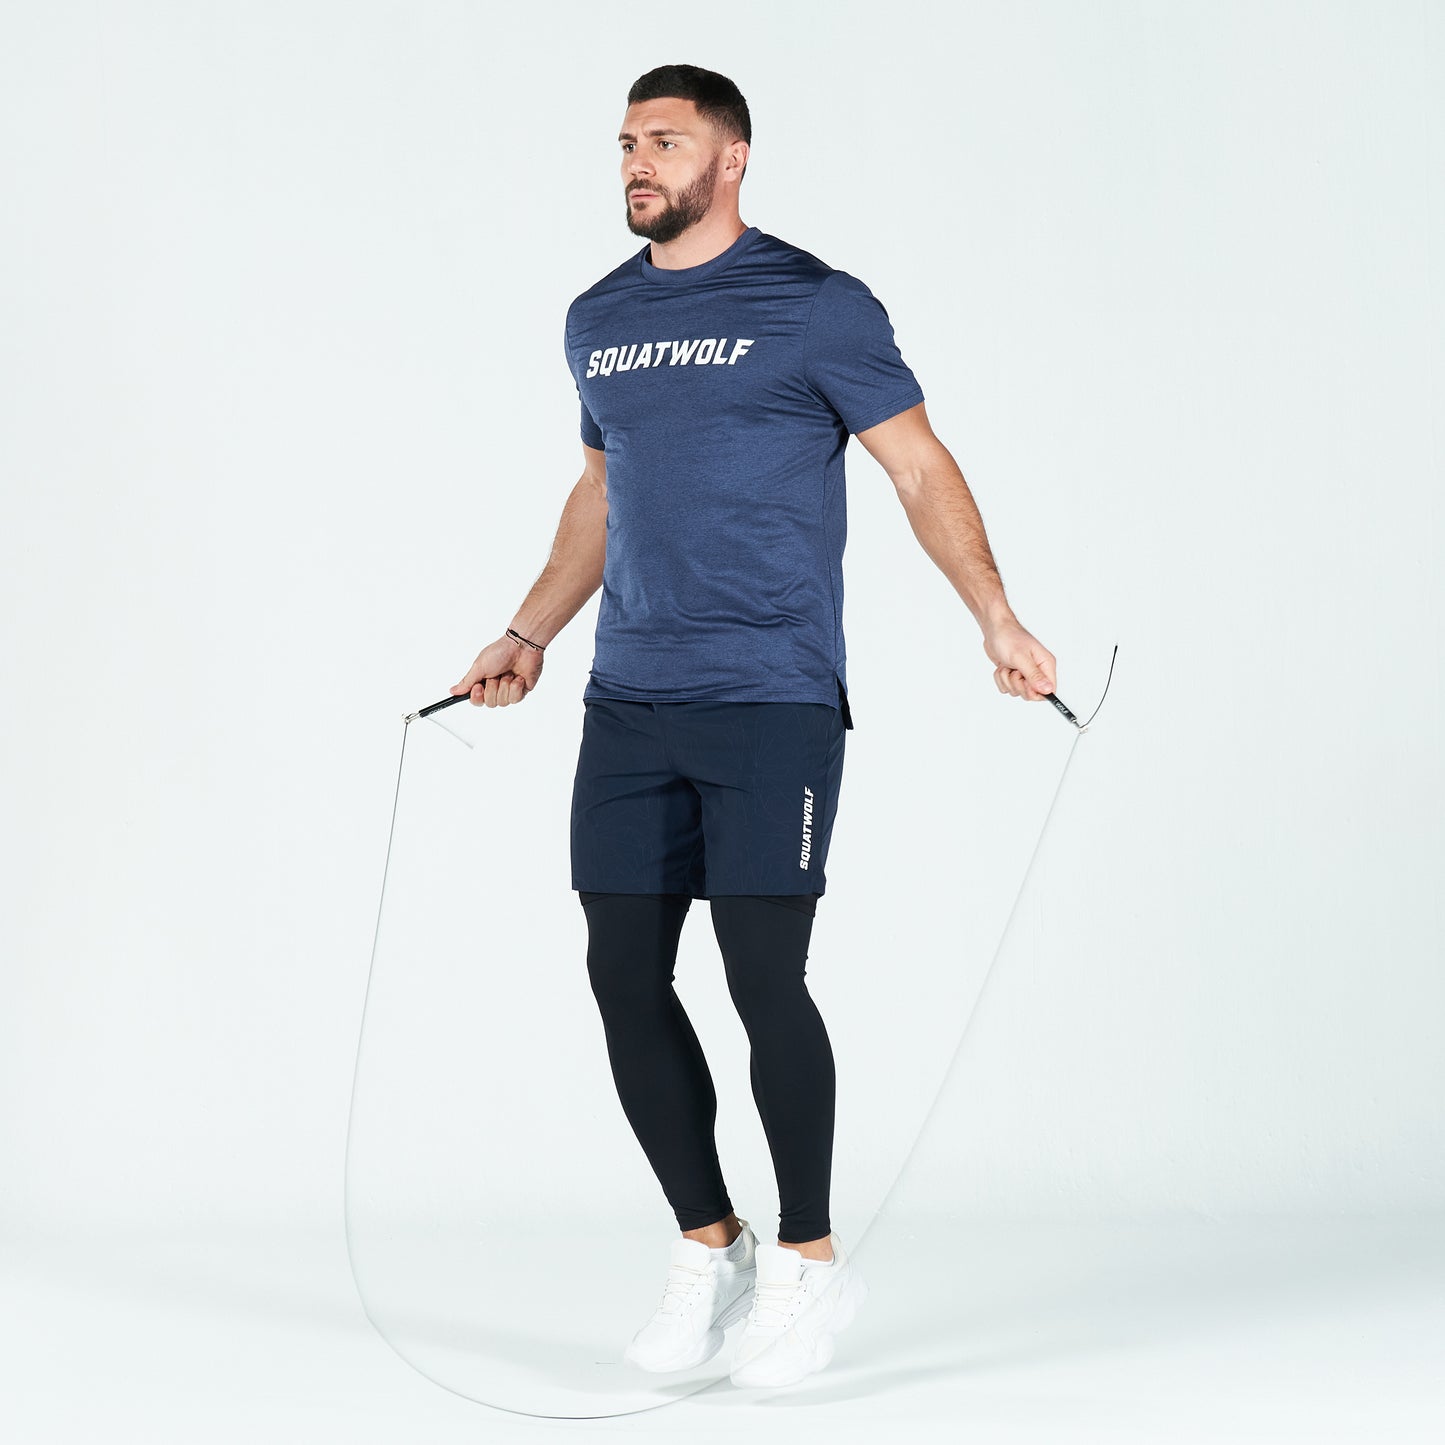 squatwolf-workout-clothes-core-aerotech-muscle-tee-navy-marl-gym-shirts-for-men